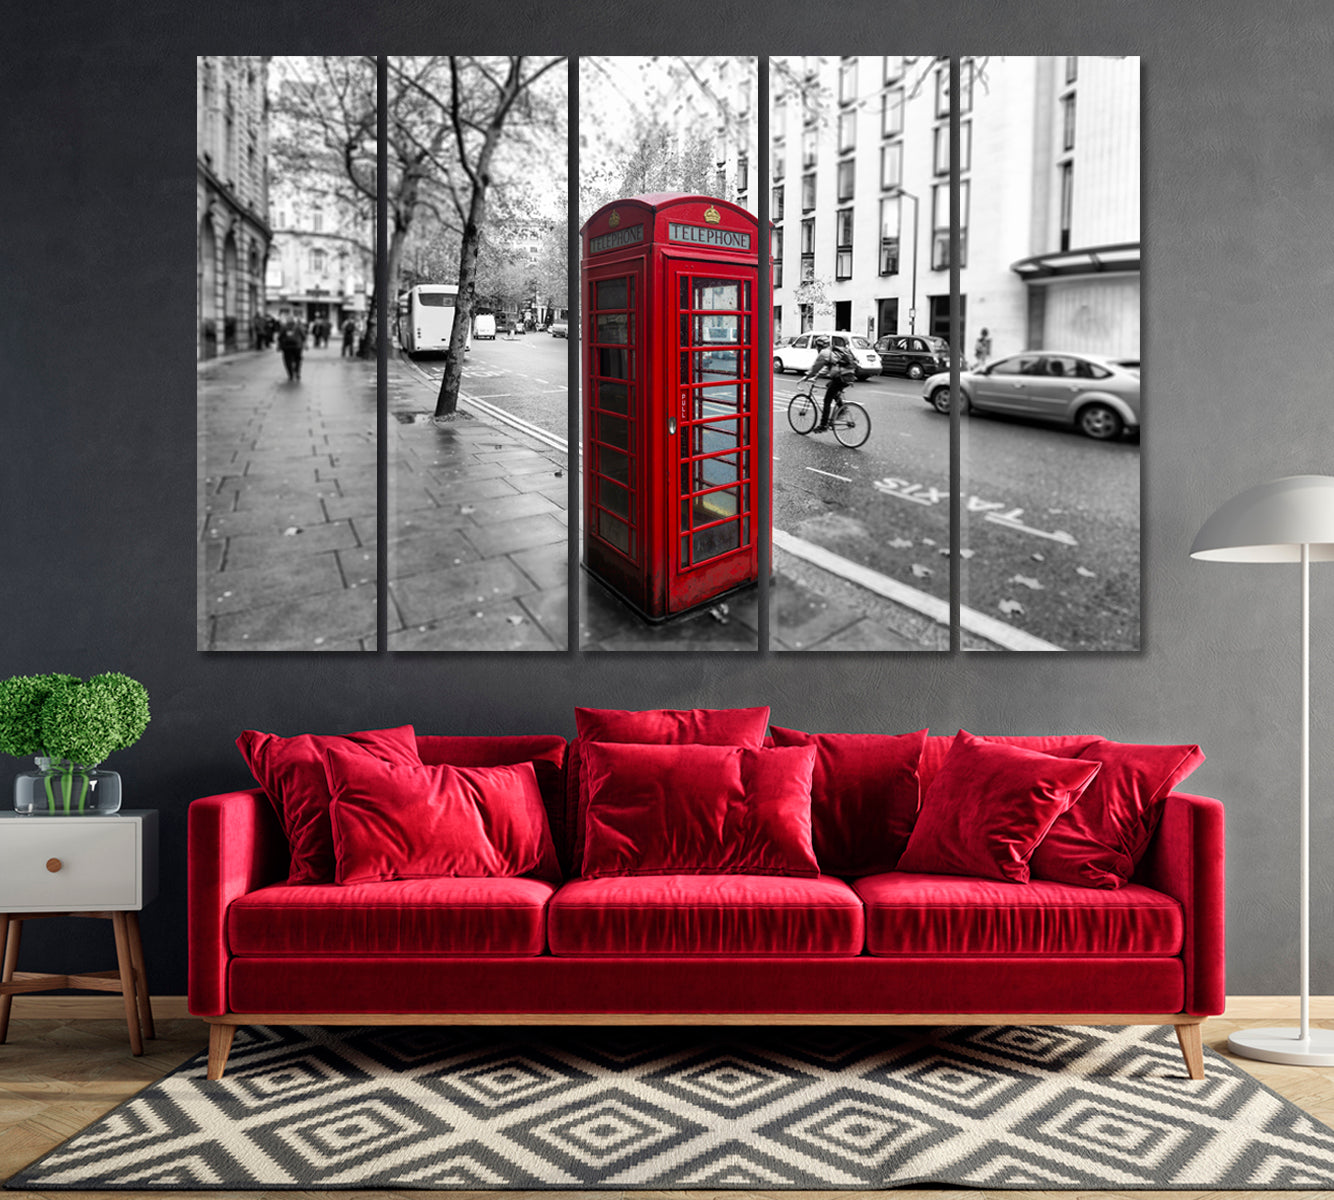 Red Telephone Booth in London UK Canvas Print-Canvas Print-CetArt-1 Panel-24x16 inches-CetArt